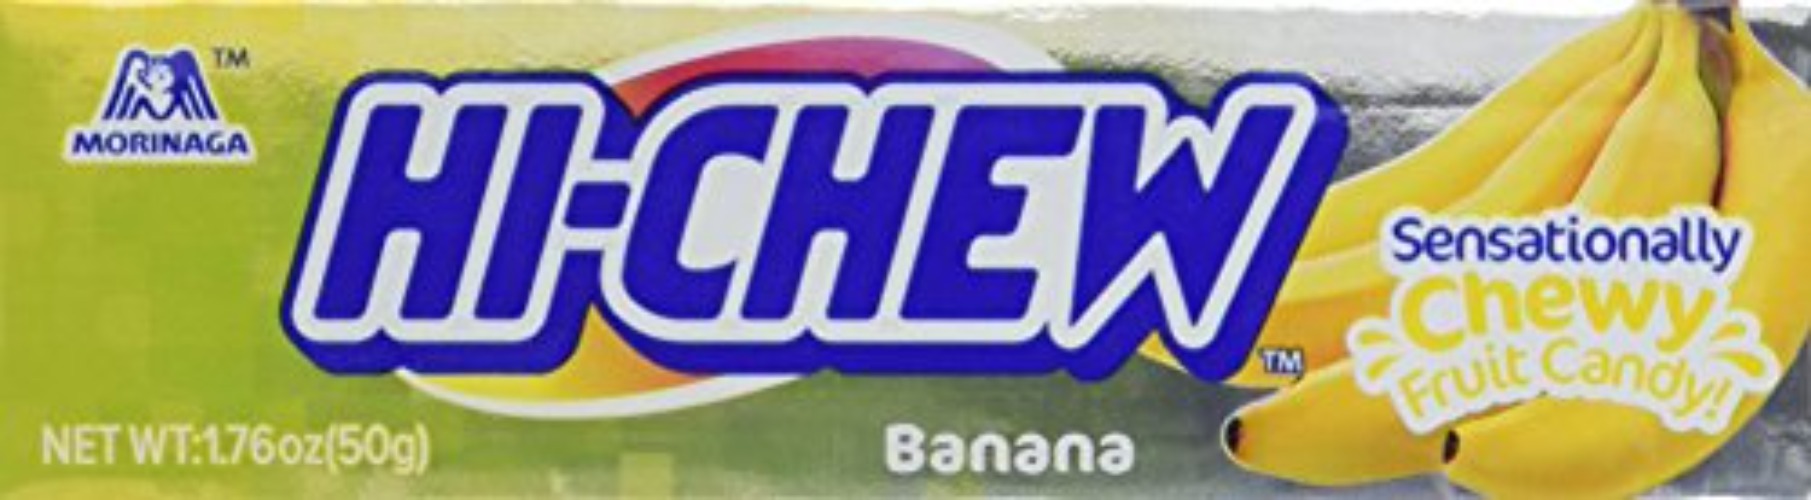 Hi-Chew Sensationally Chewy Japanese Fruit Candy, Banana, 1.76 Ounce (Pack of 10) - Banana - 1.76 Ounce (Pack of 10)